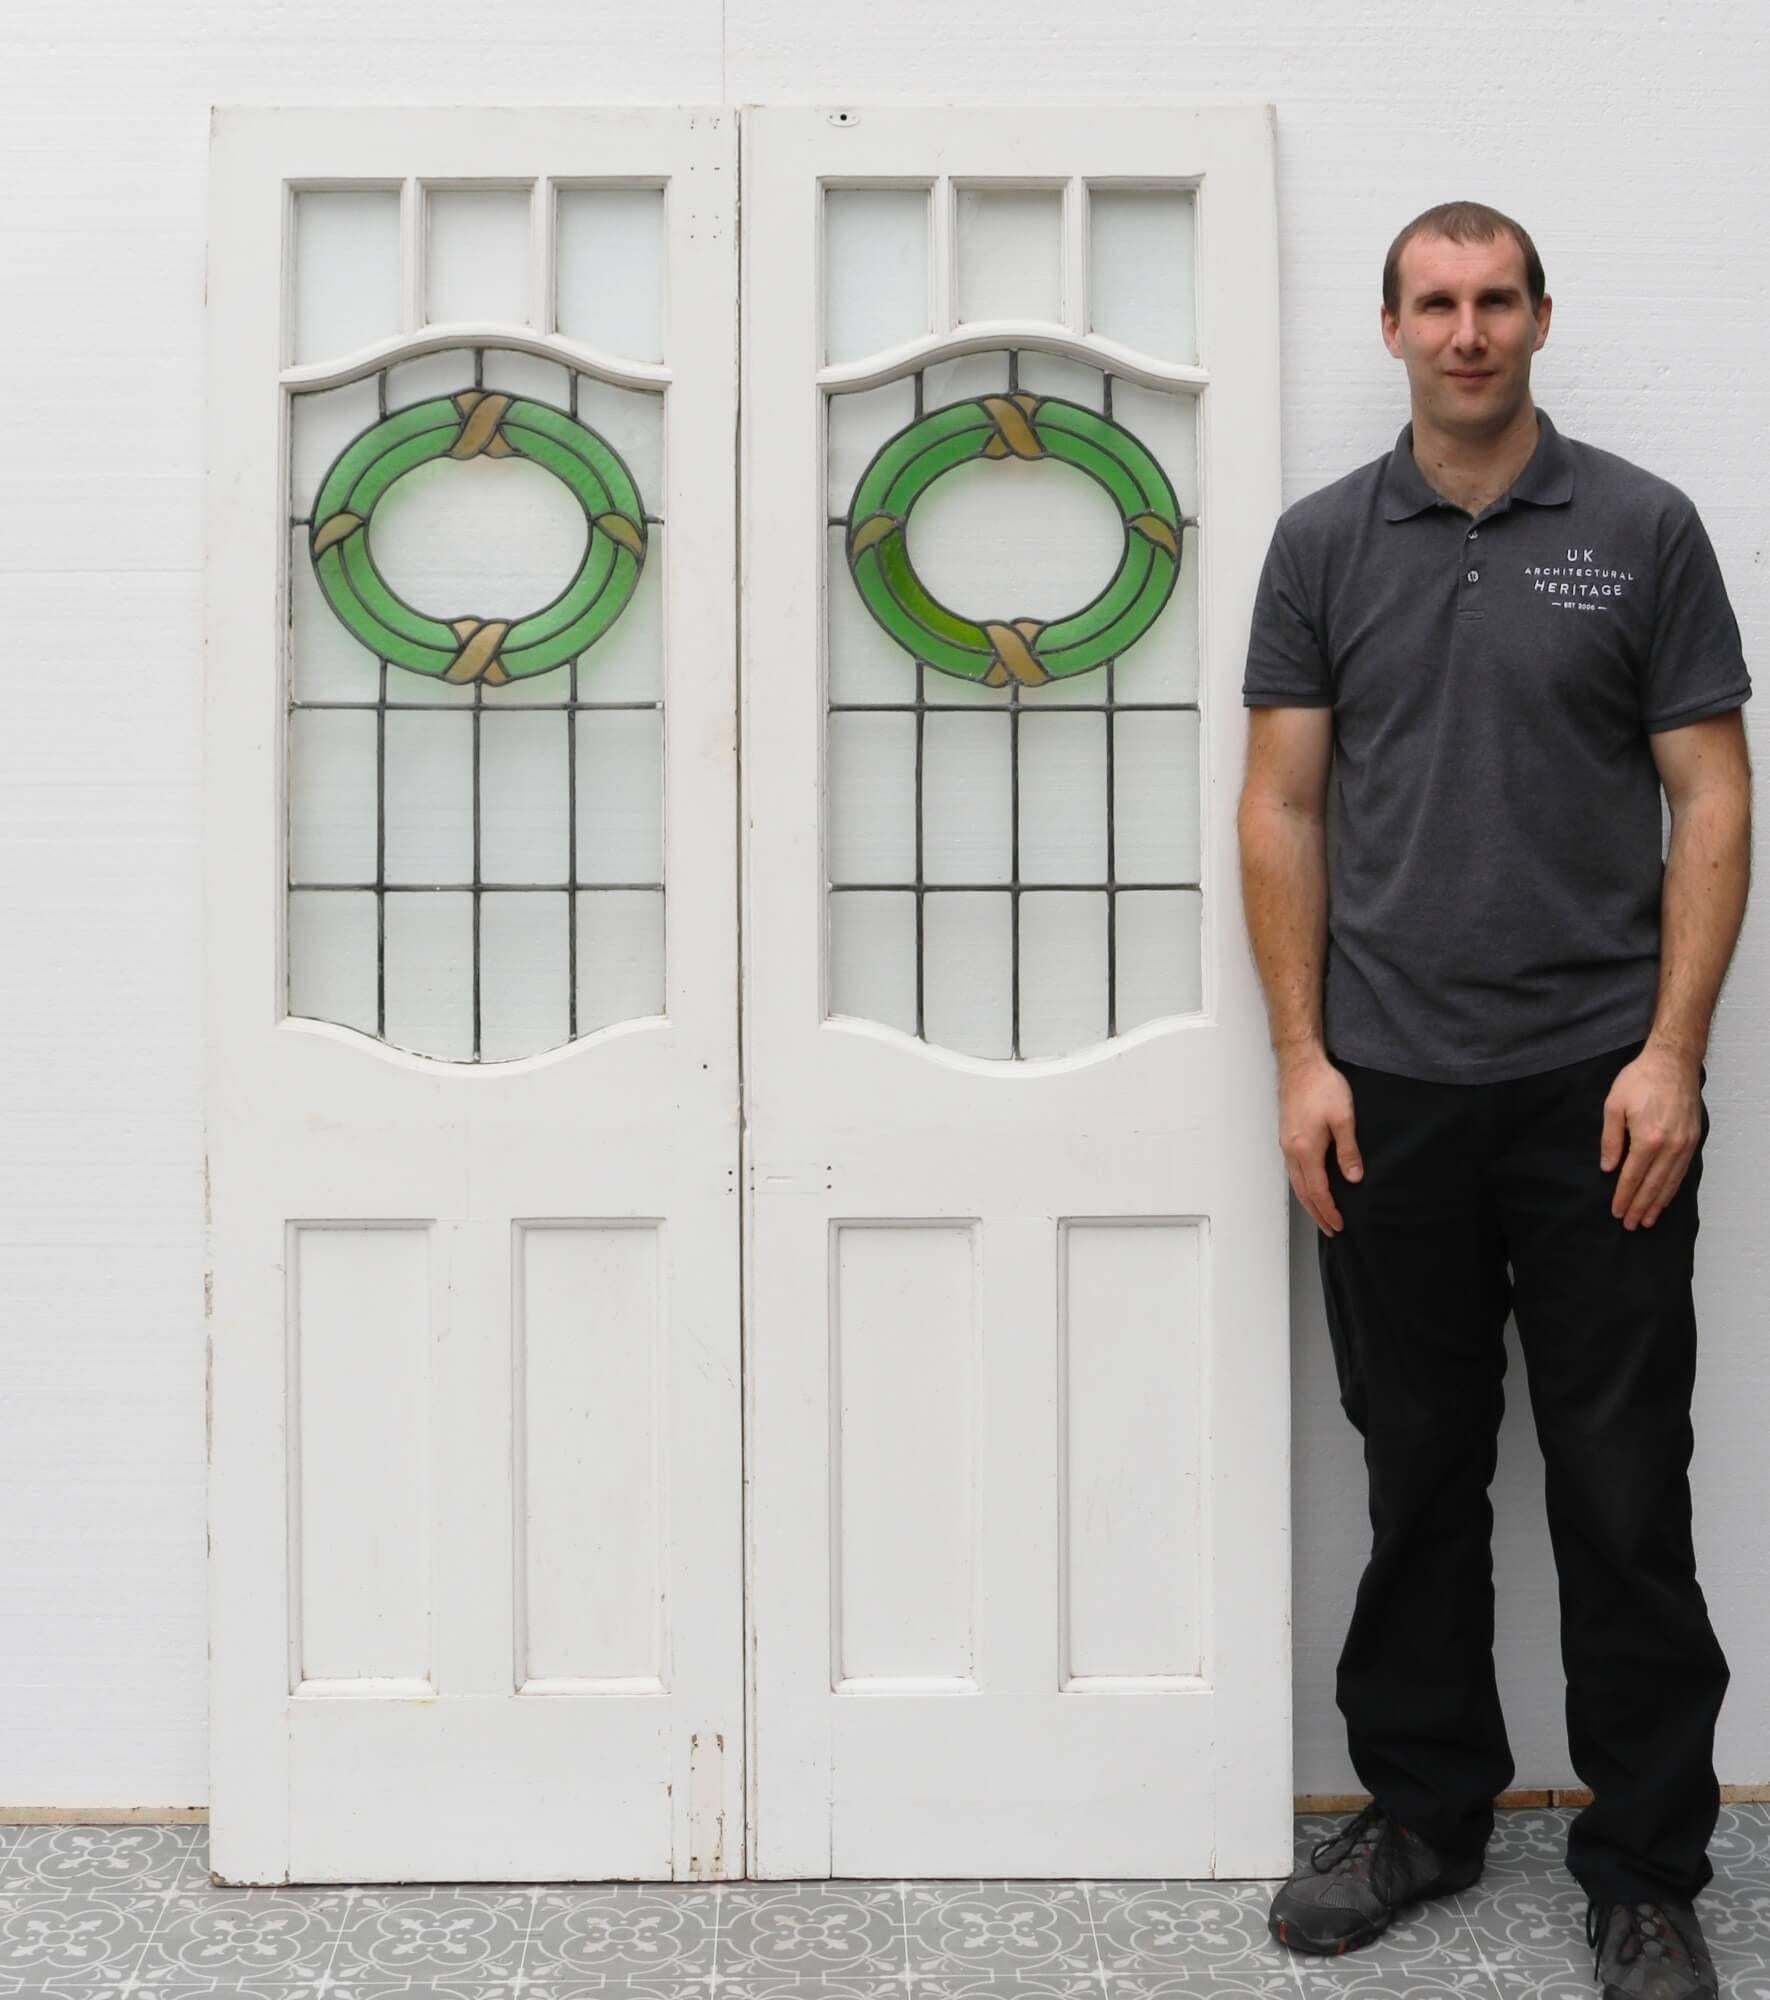 You can imagine these early 20th century front doors with stained glass sitting proudly at the porch of a large Victorian townhouse. At over 100 years old, each door features original leaded glass with no cracks. It is a simple, elegant design